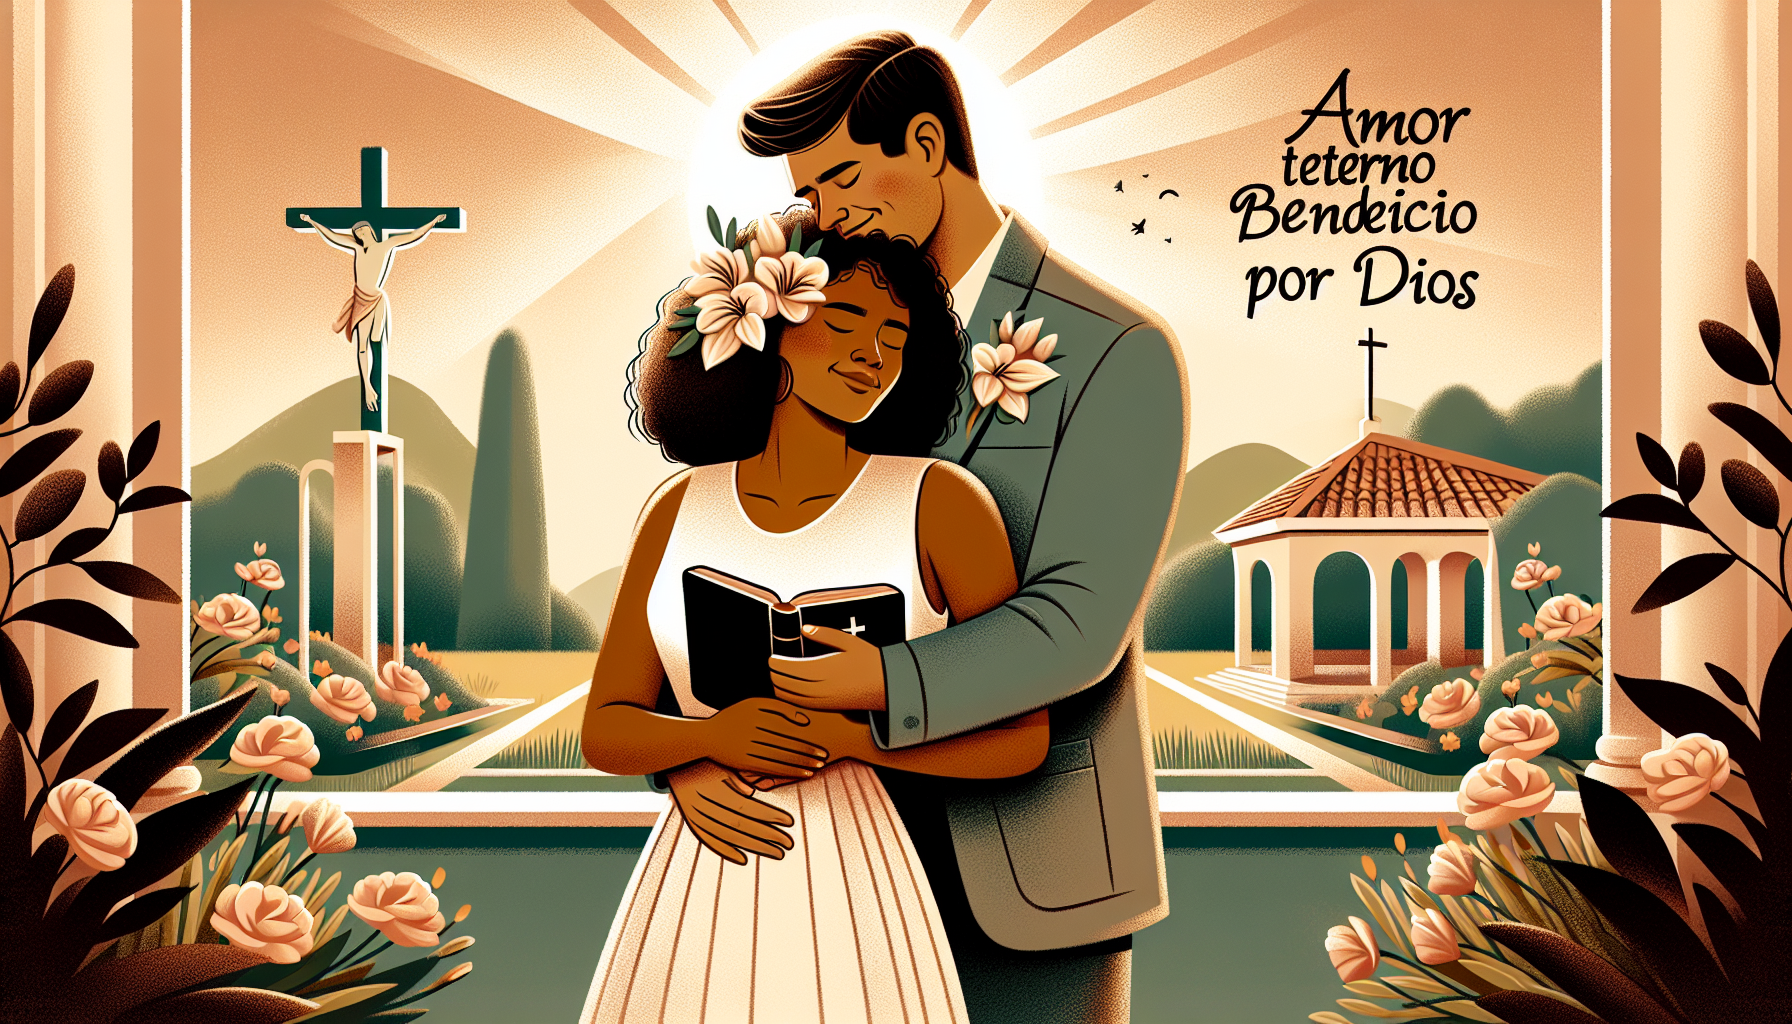 Create a heartwarming image that illustrates a Christian love message for a husband. The scene should feature a loving couple embracing in a serene, picturesque setting such as a garden or a church. I